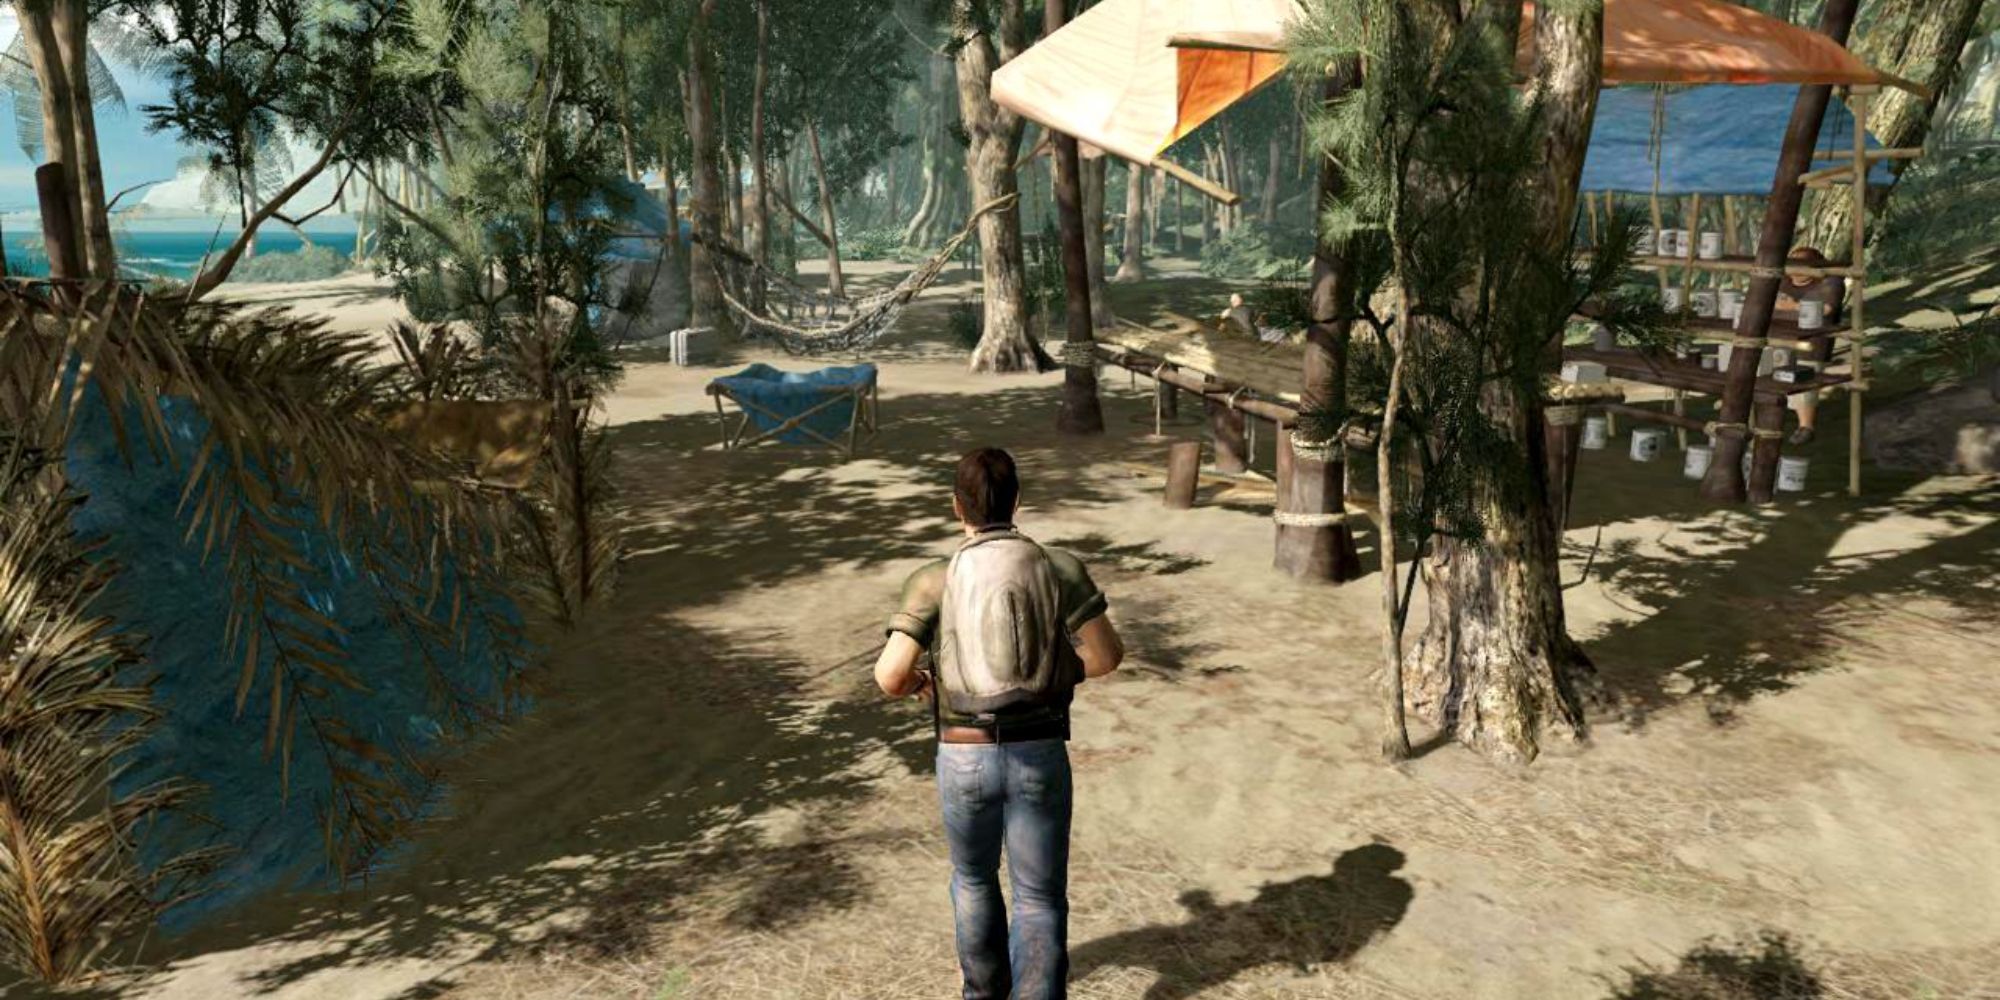 A wide angle, third-person perspective screenshot from the game Lost: Via Domus featuring the protagonist Elliot running across a beach with a backpack on